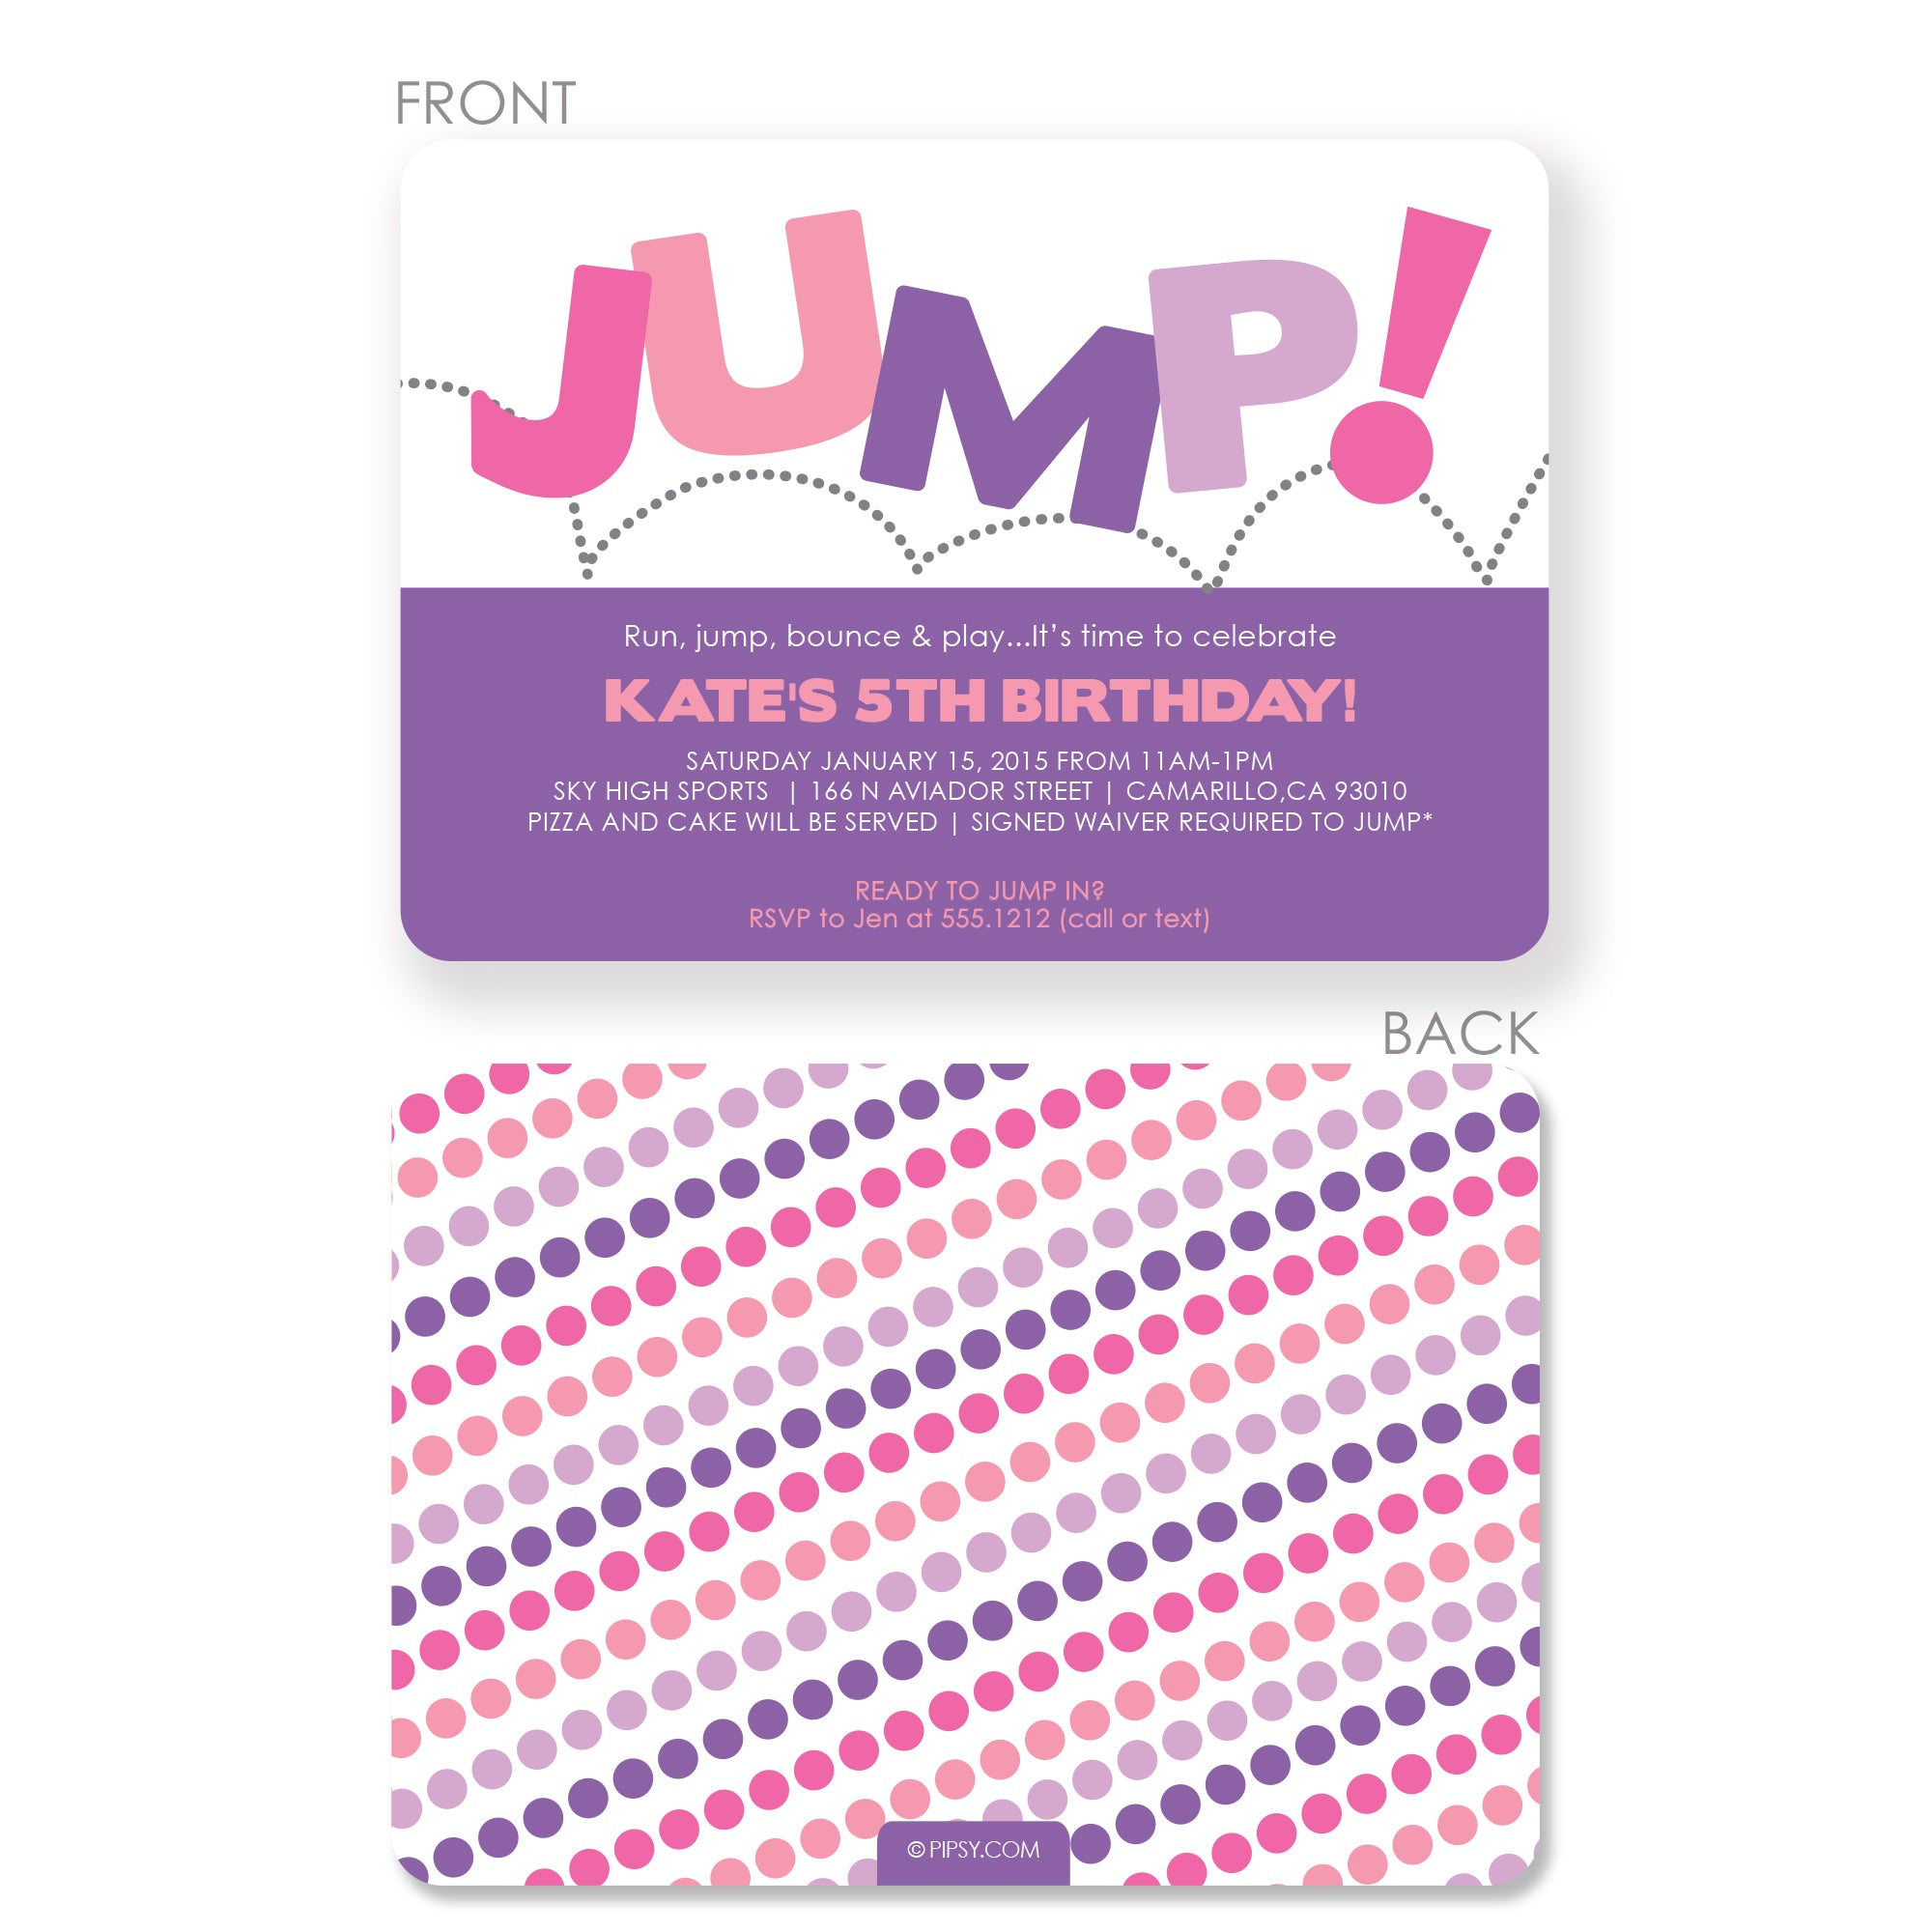 Jump Birthday Invitation, Printed on Premium heavyweight cardstock, perfect for a bouncy house or trampoline park | Pipsy.com